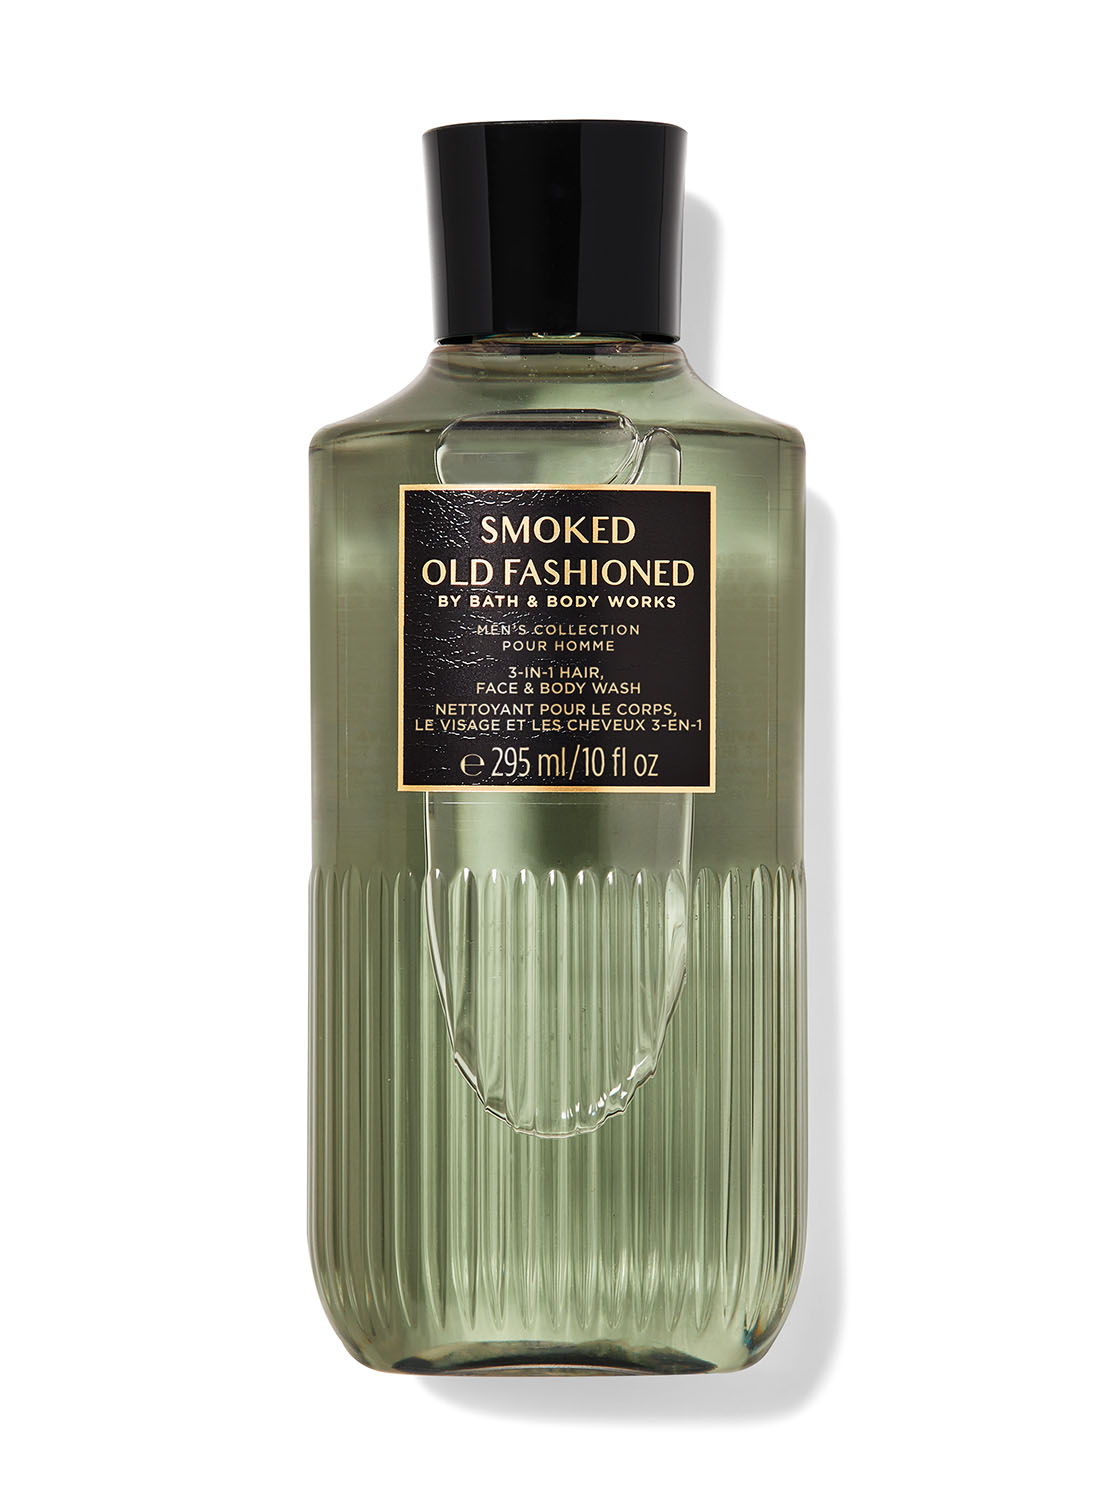 Smoked Old Fashioned 3-in-1 Hair, Face & Body Wash | Bath and Body Works